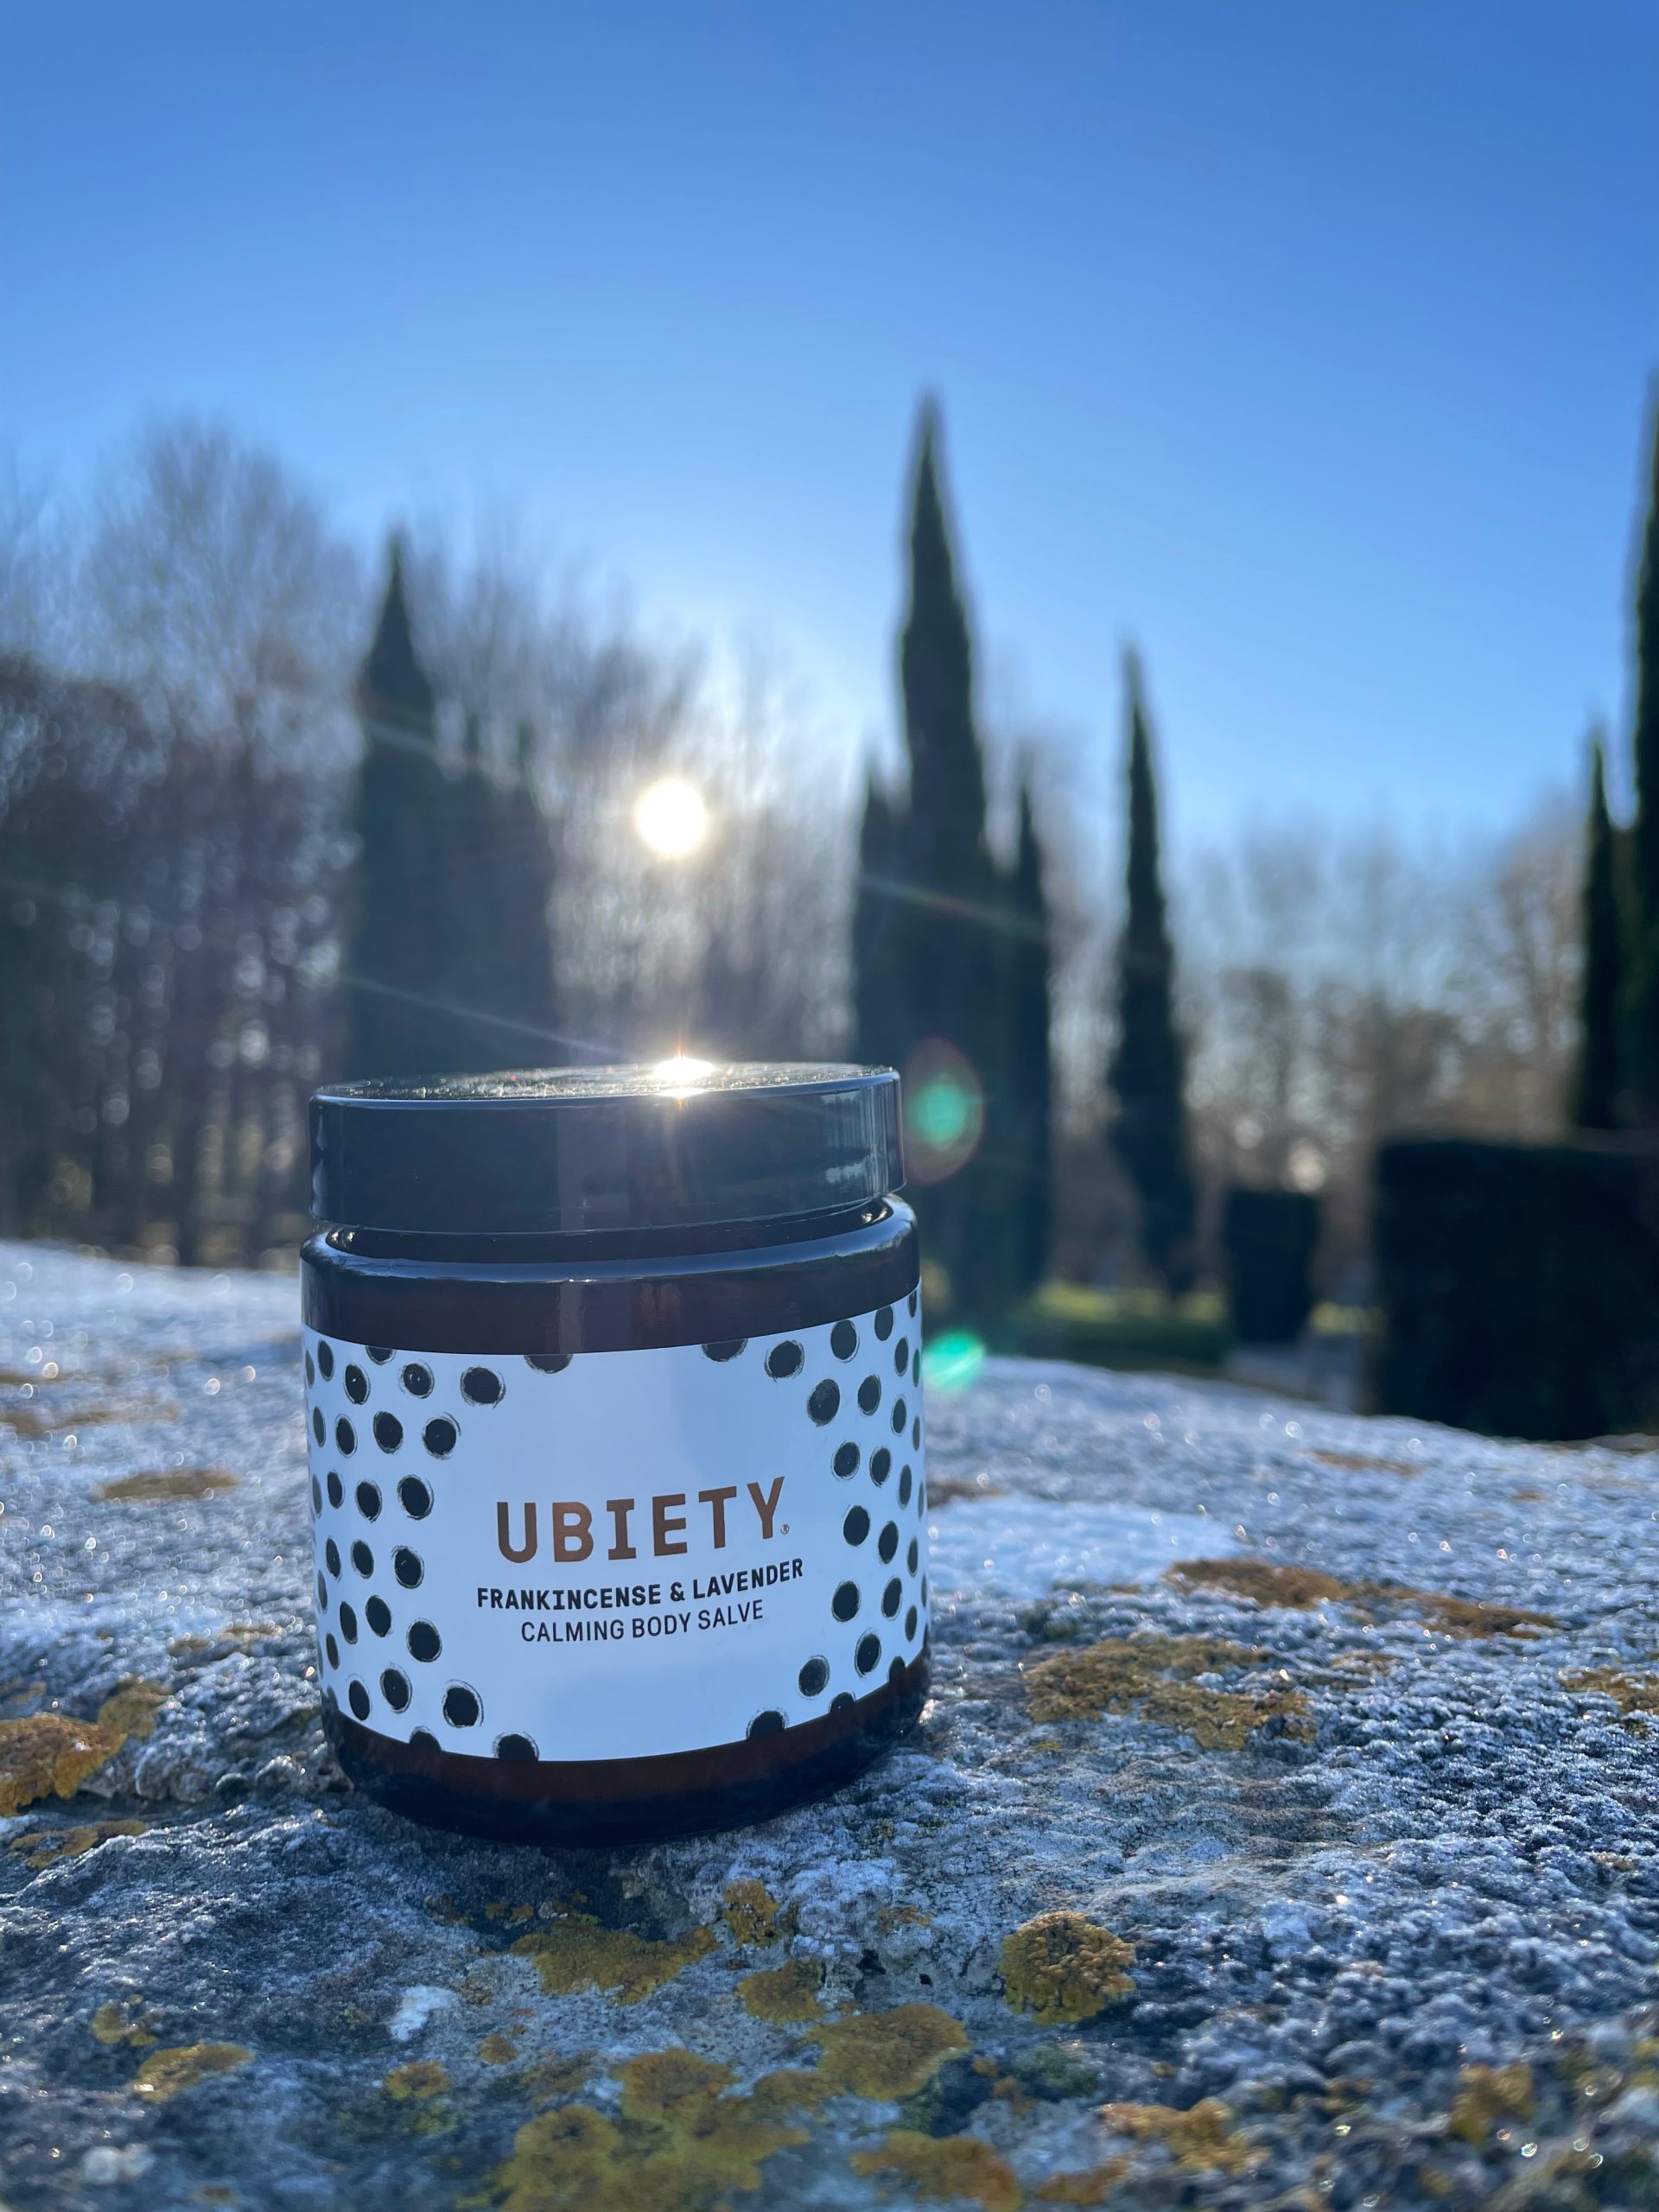 Ubiety Calming Body Salve against Winsley grounds backdrop